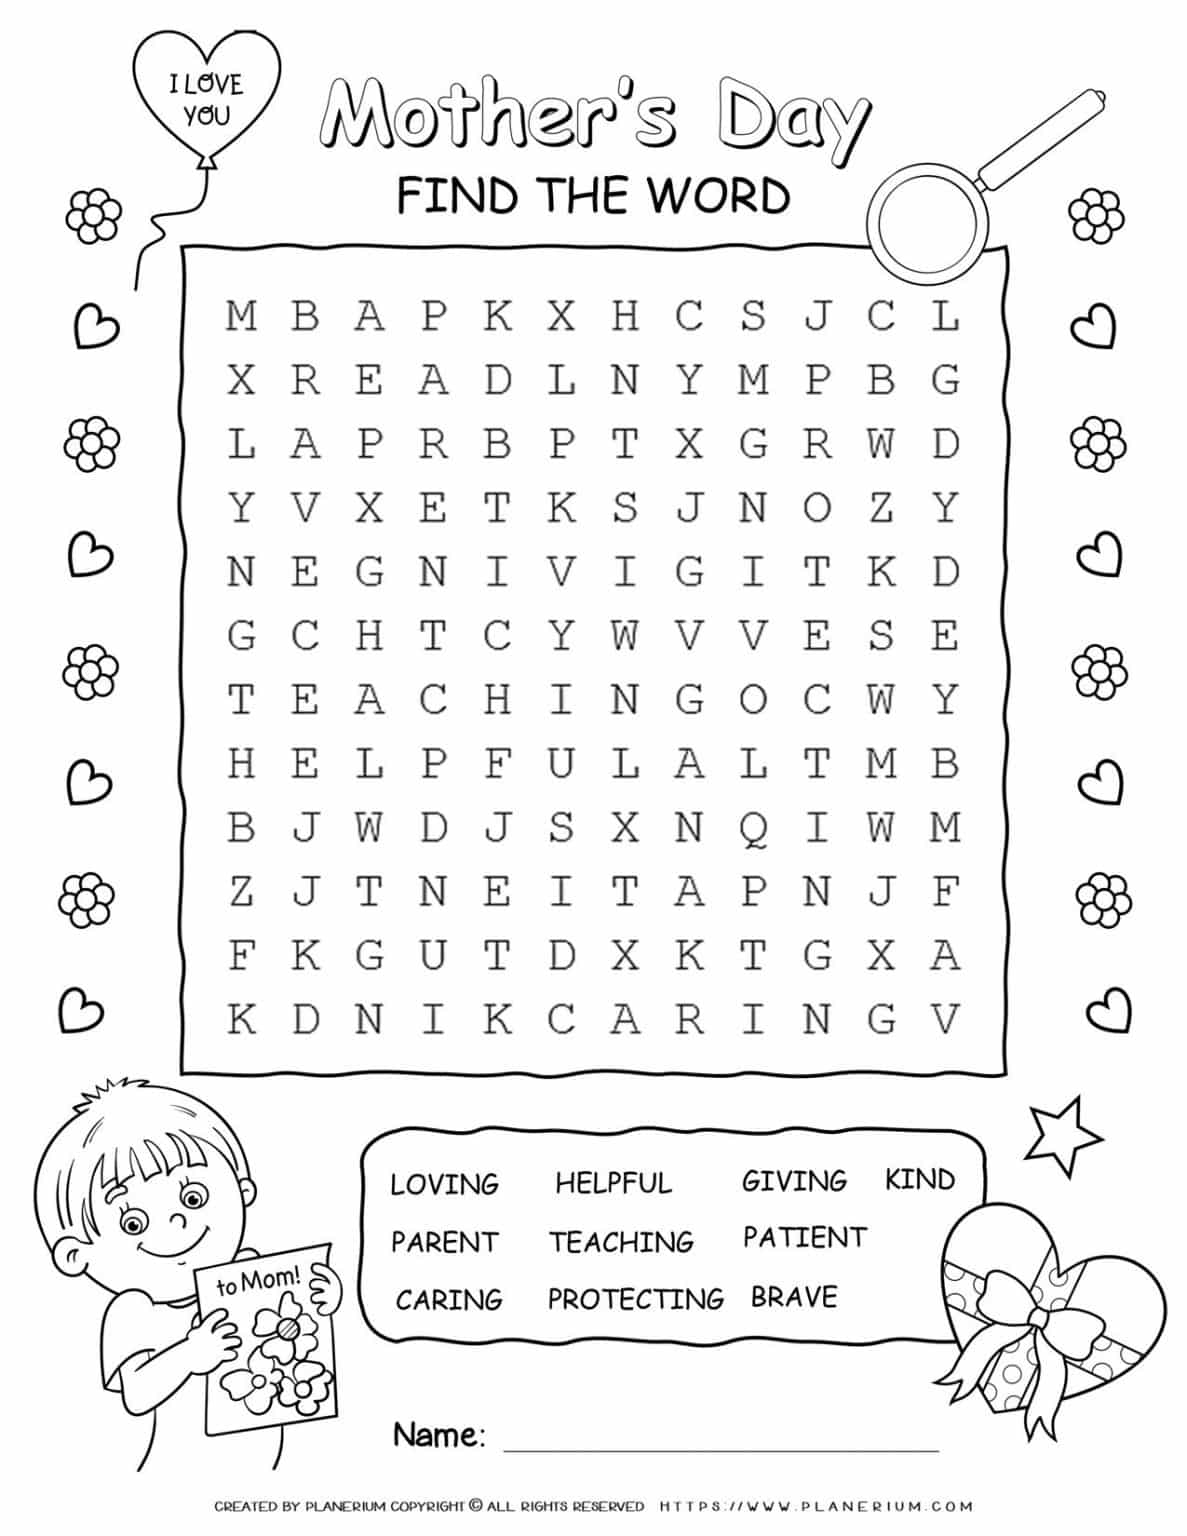 mother-s-day-word-search-puzzle-planerium